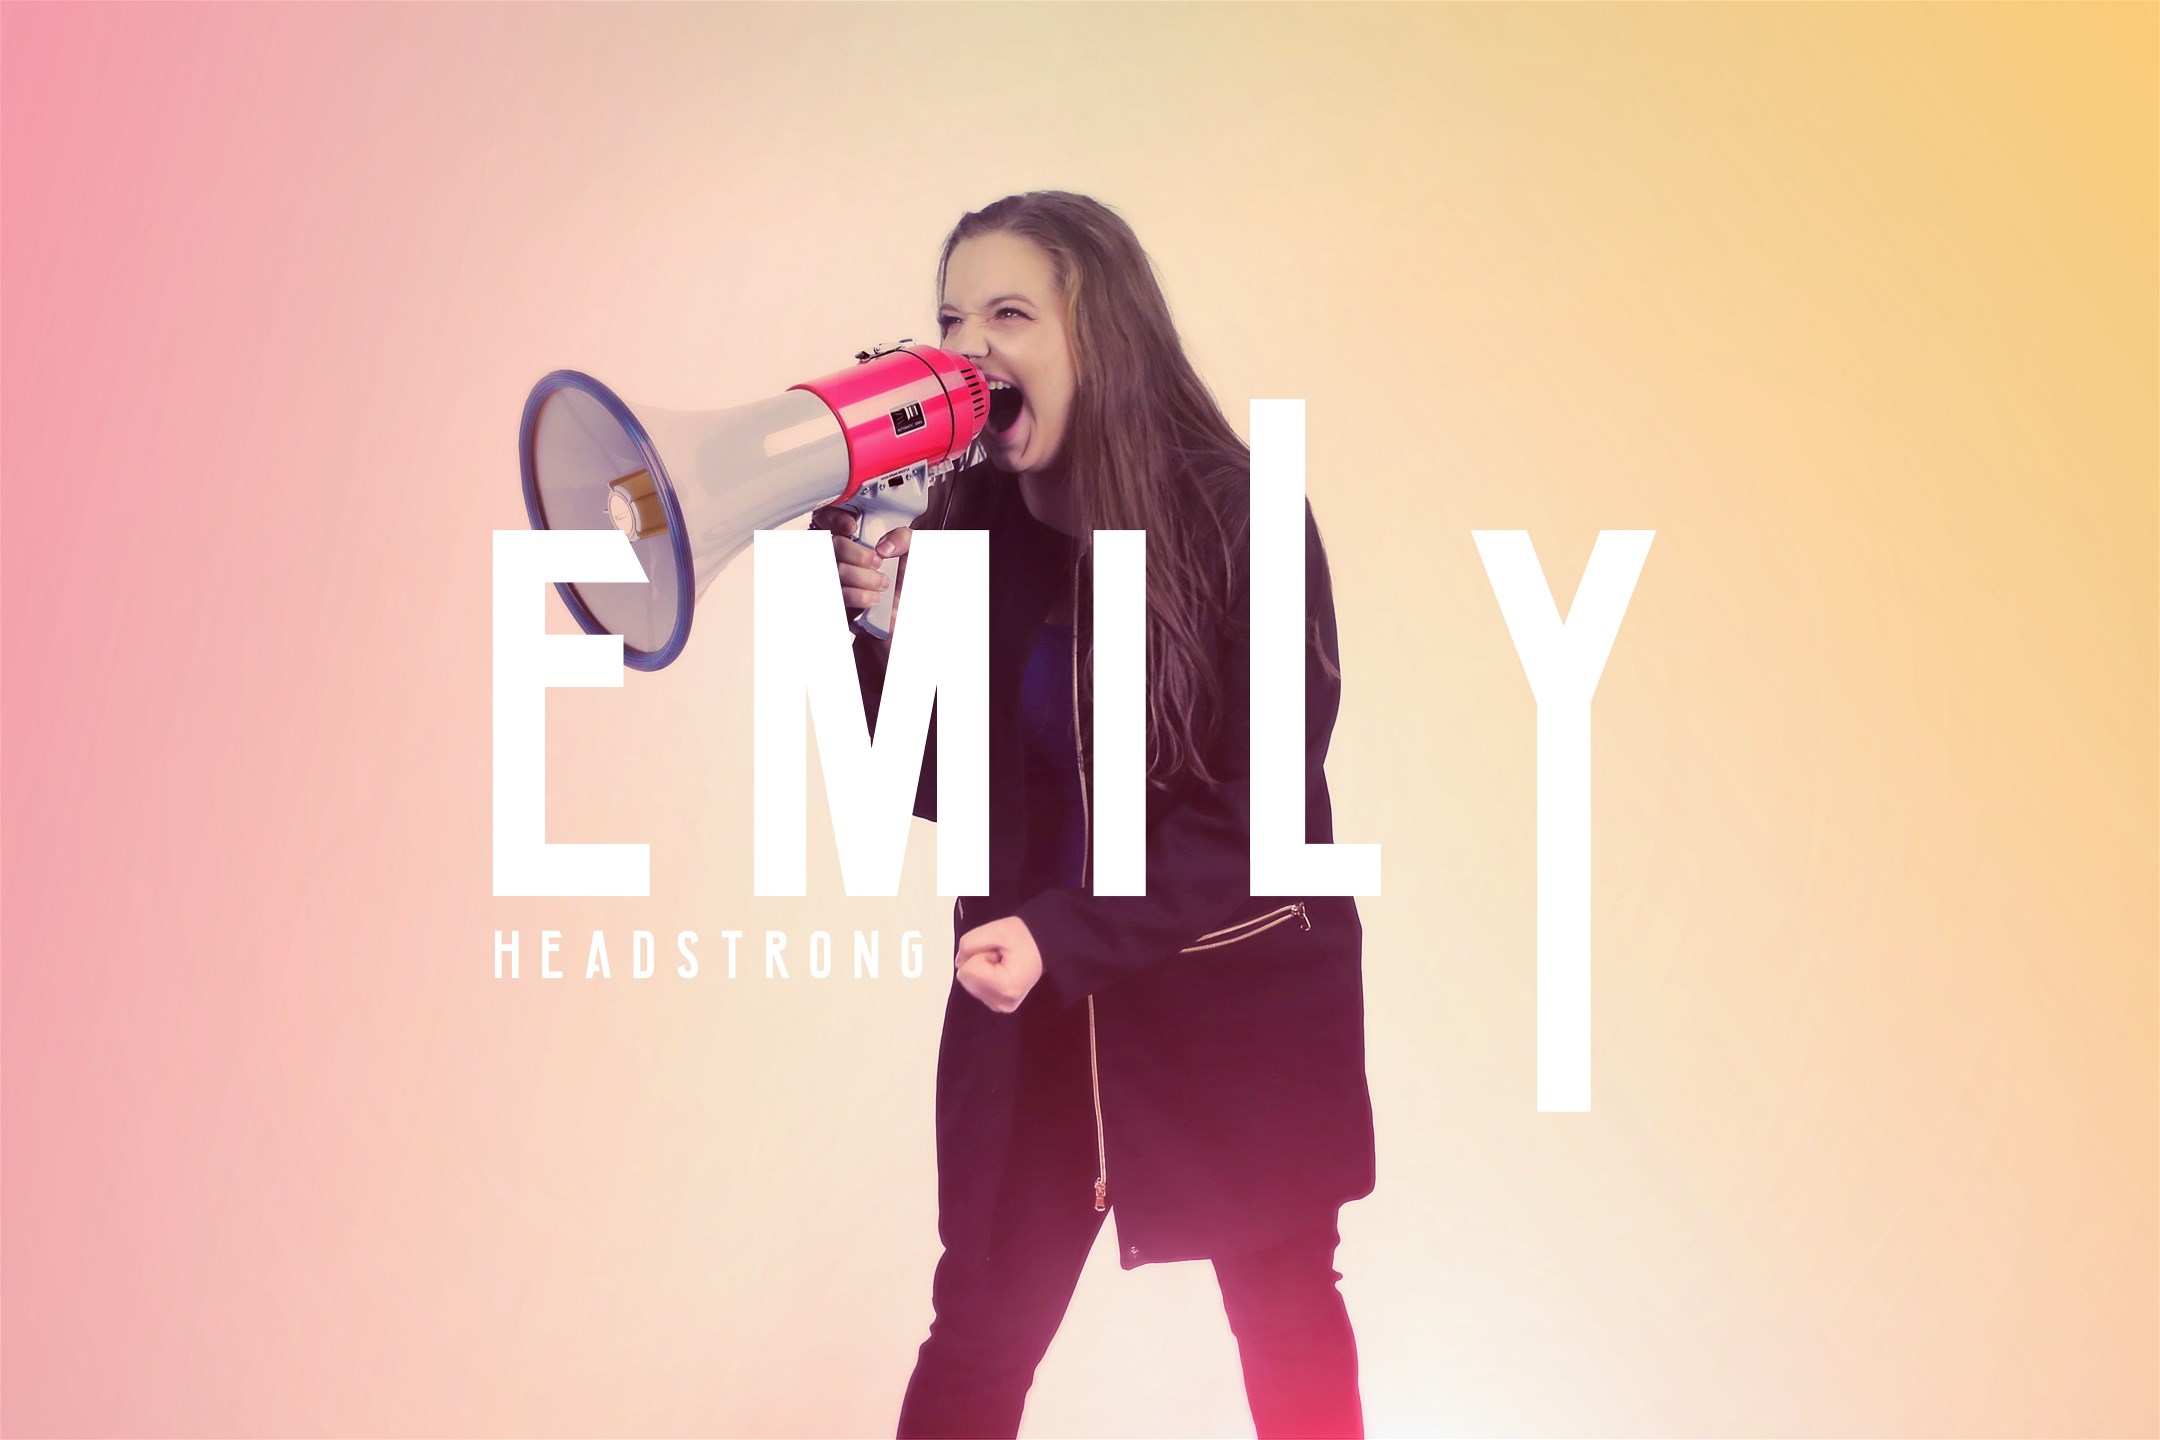 EMILY HEADSTRONG POSTER 71dpi